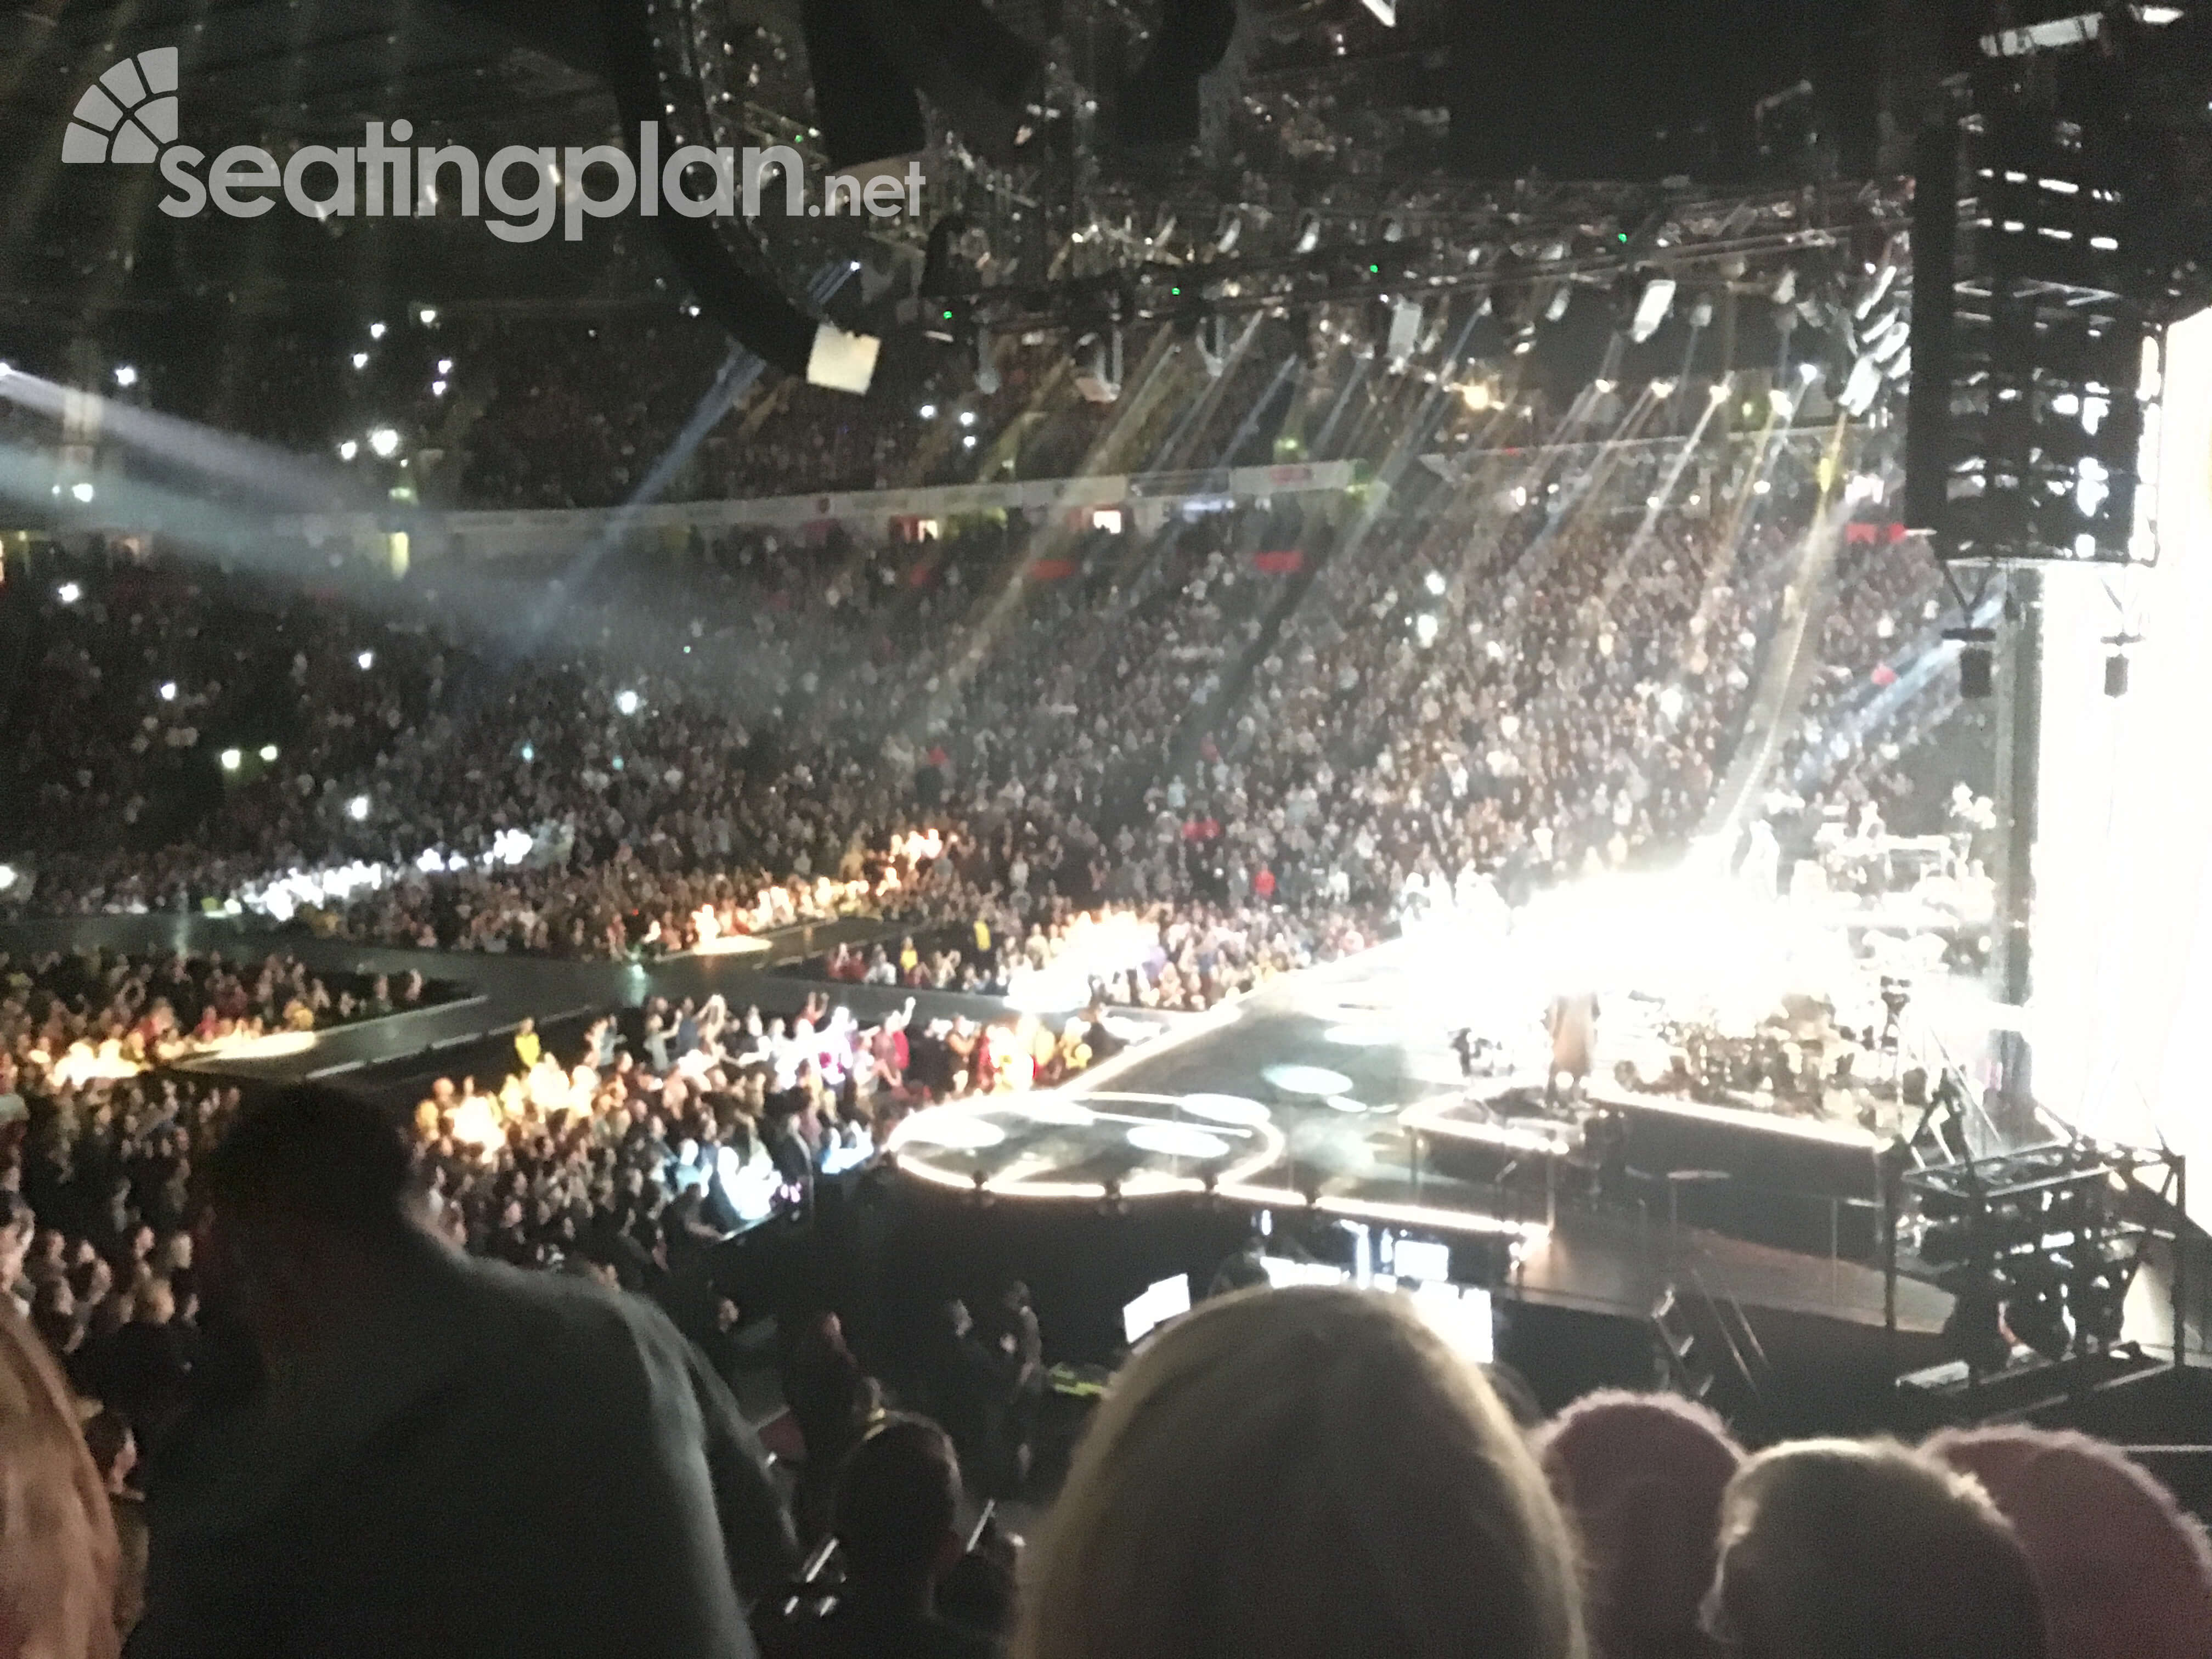 View of Madonna (Rebel Heart Tour 2015) at Manchester Arena from Seat Block 116